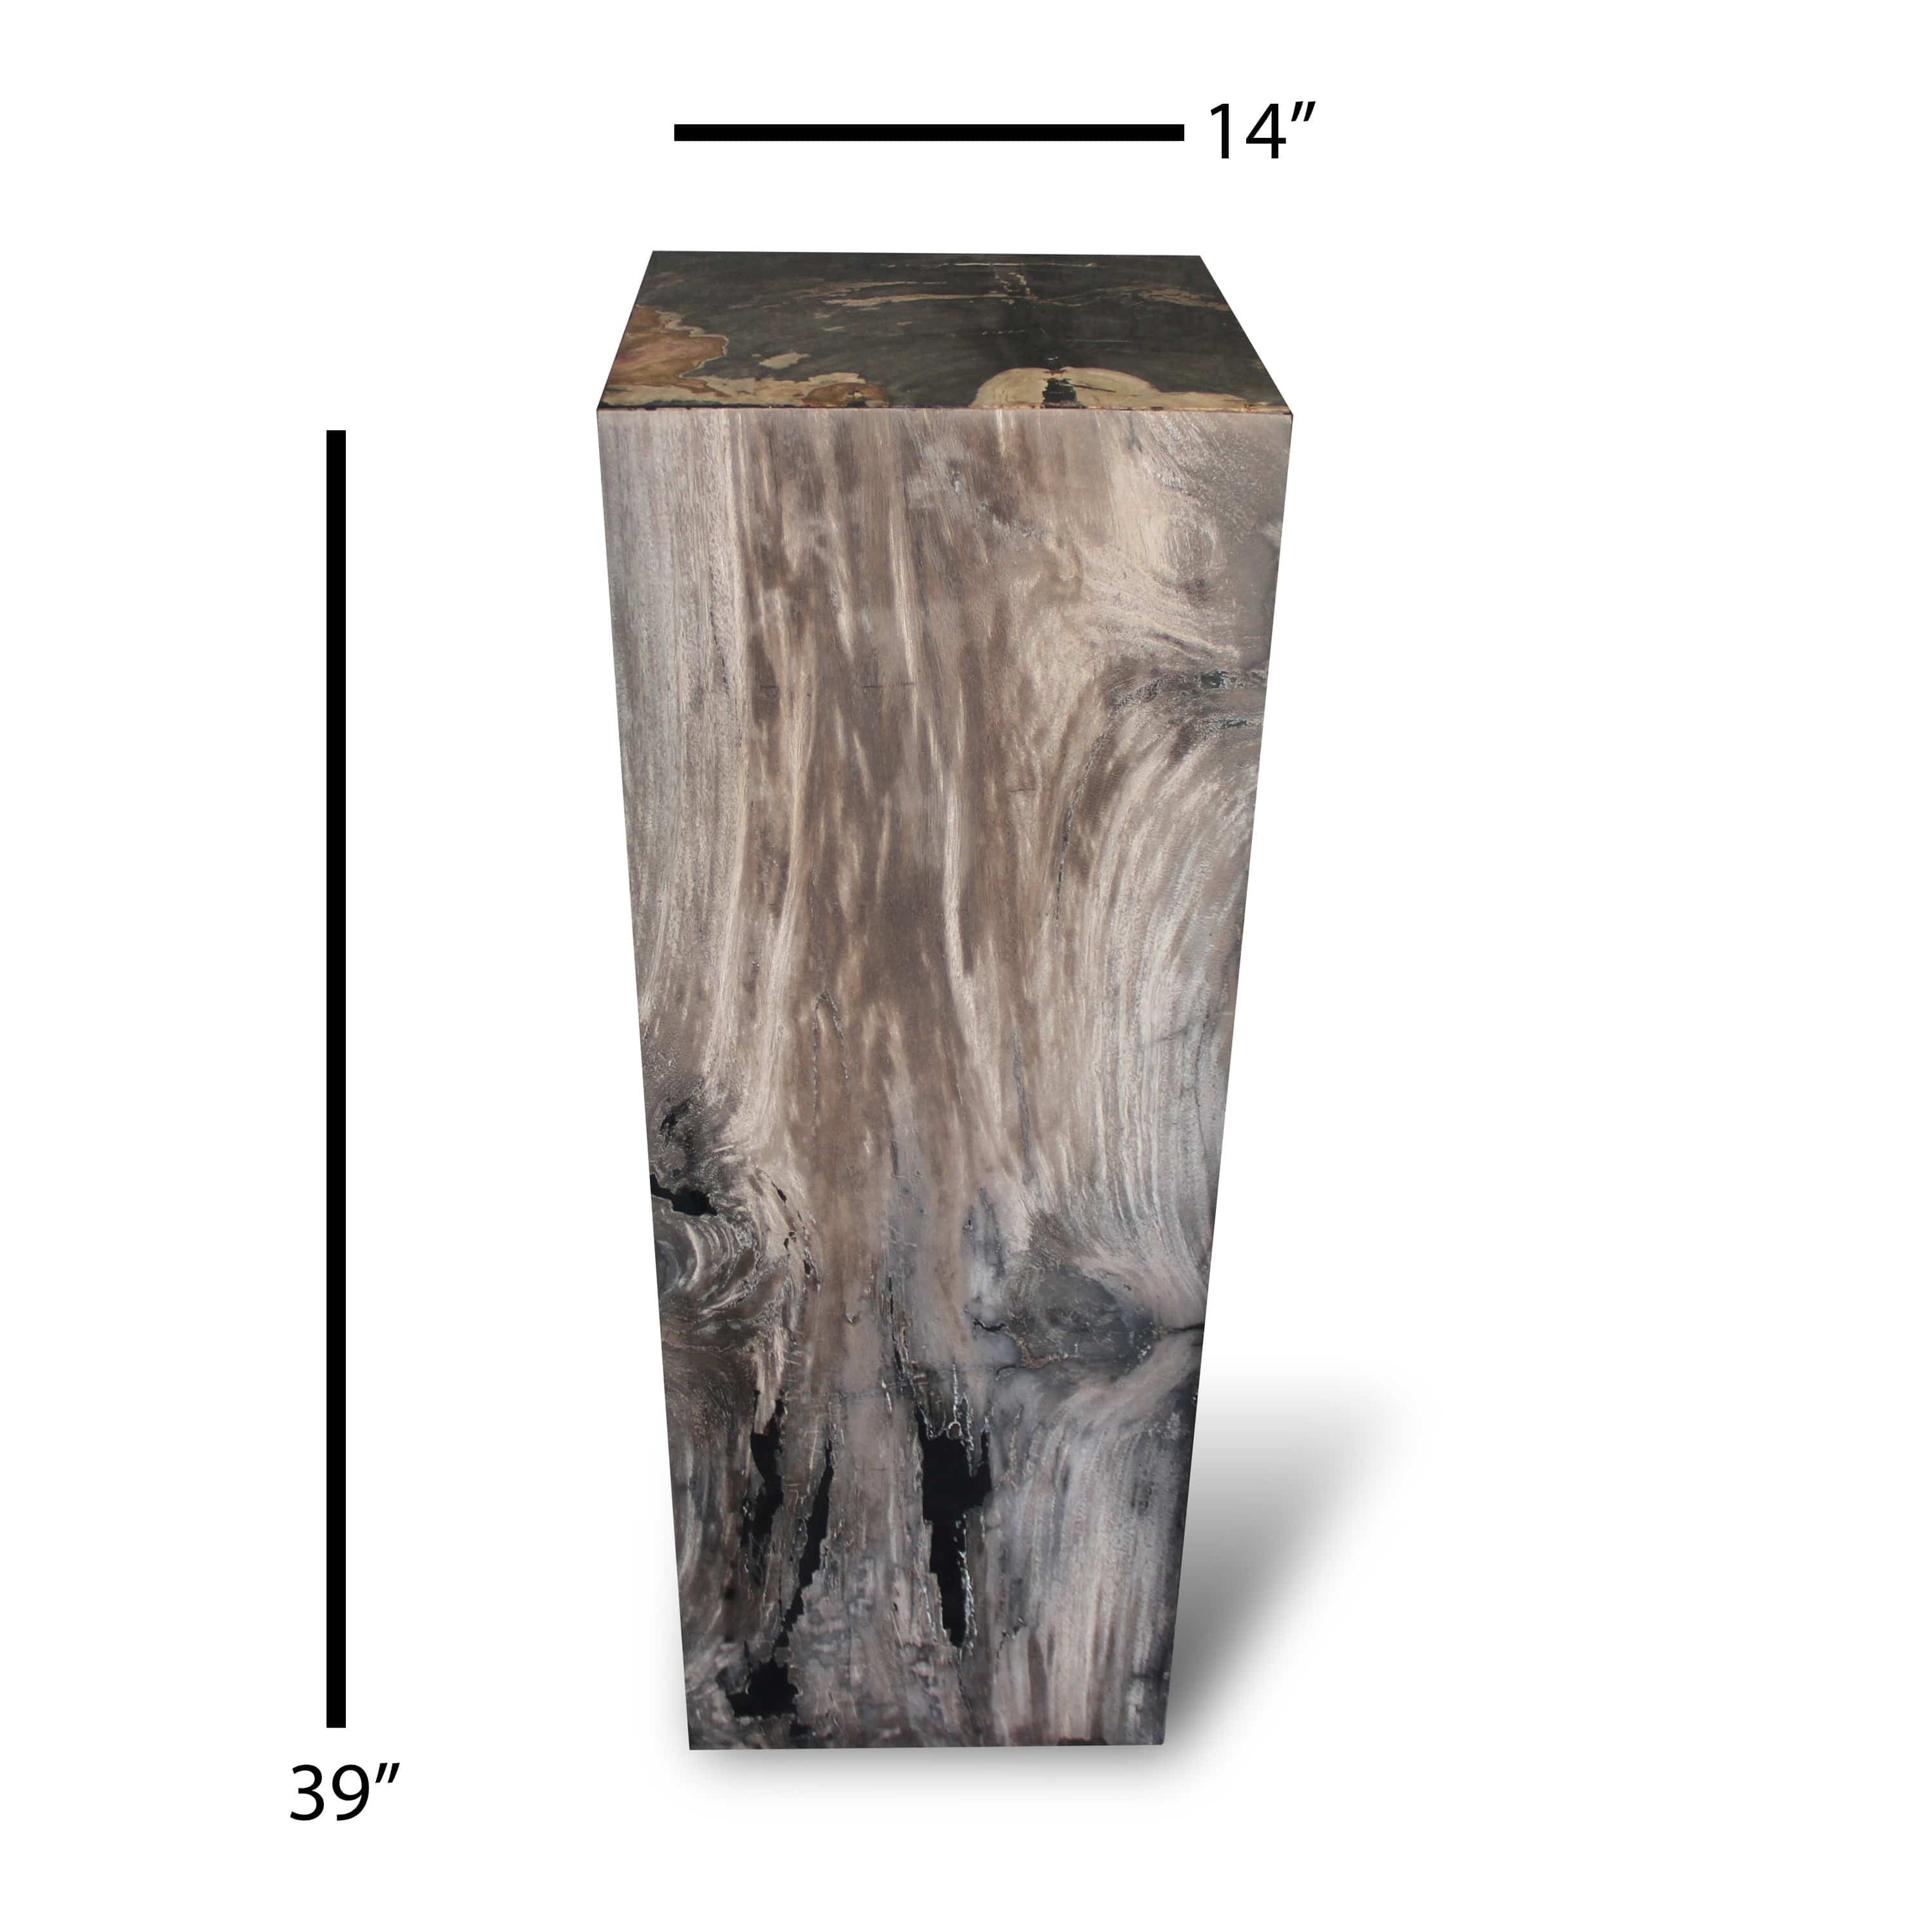 Kalifano Petrified Wood Petrified Wood Hollow Square Pedestal from Indonesia - 39" / 202 lbs PWP8000.012